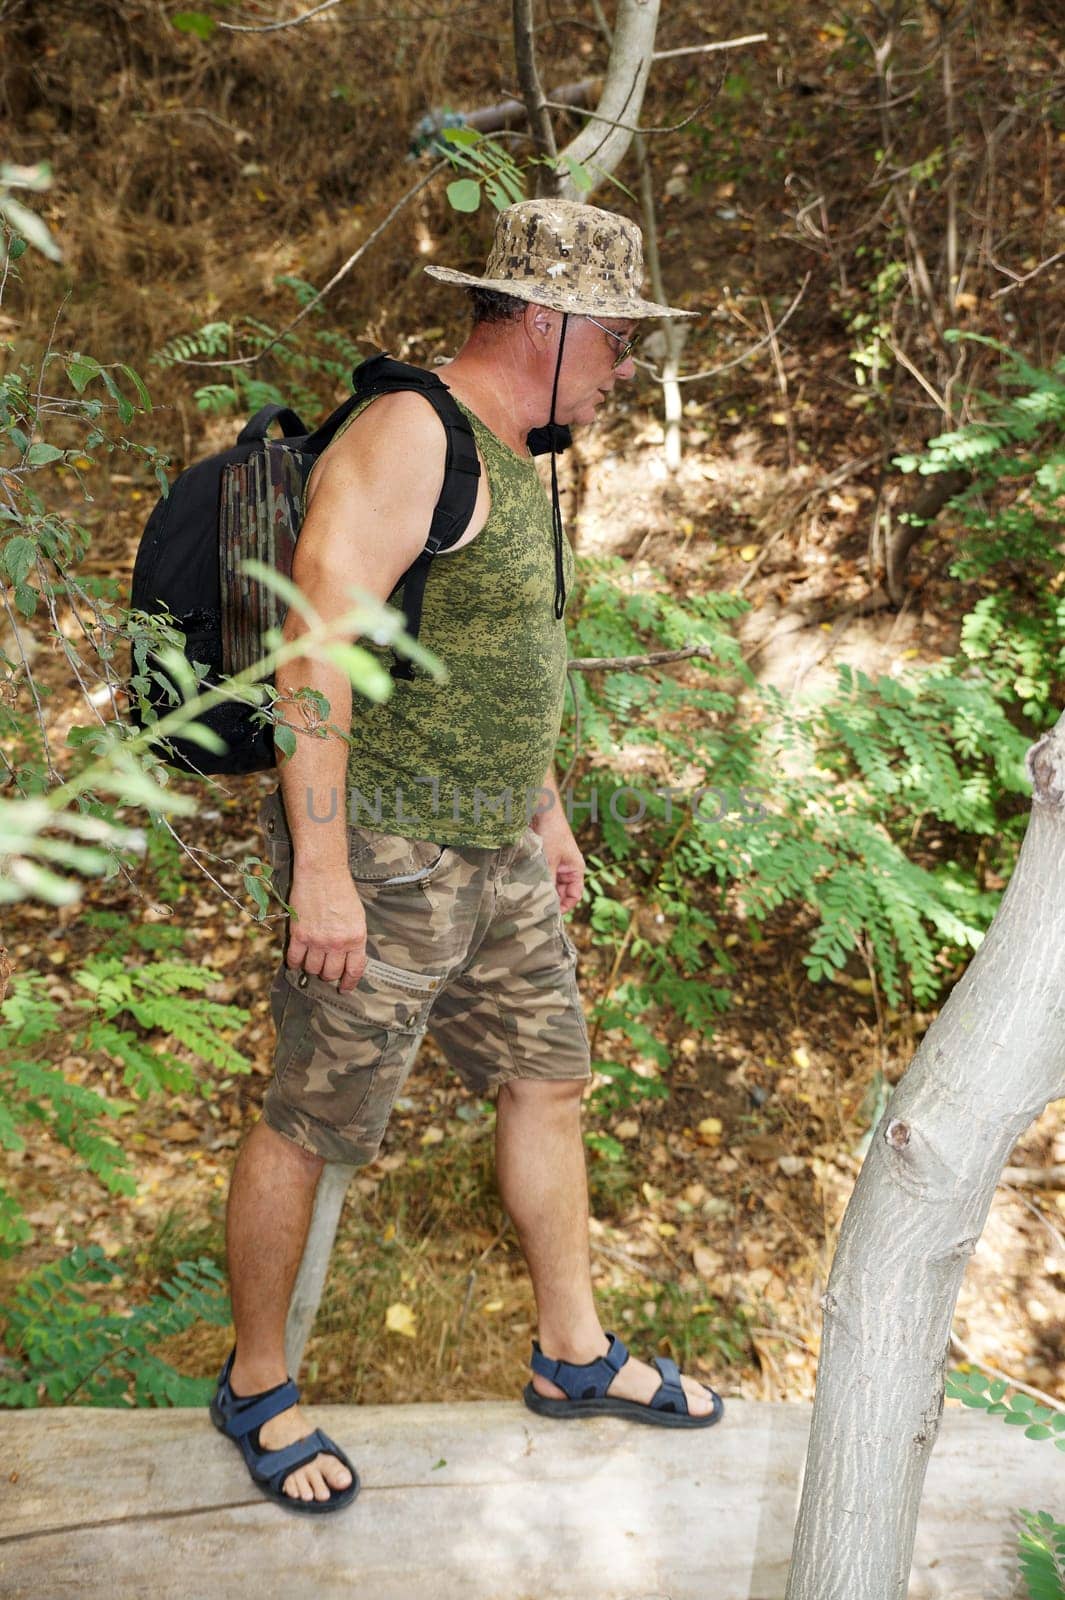 A man with a backpack hiking along a forest path in camouflage shorts.